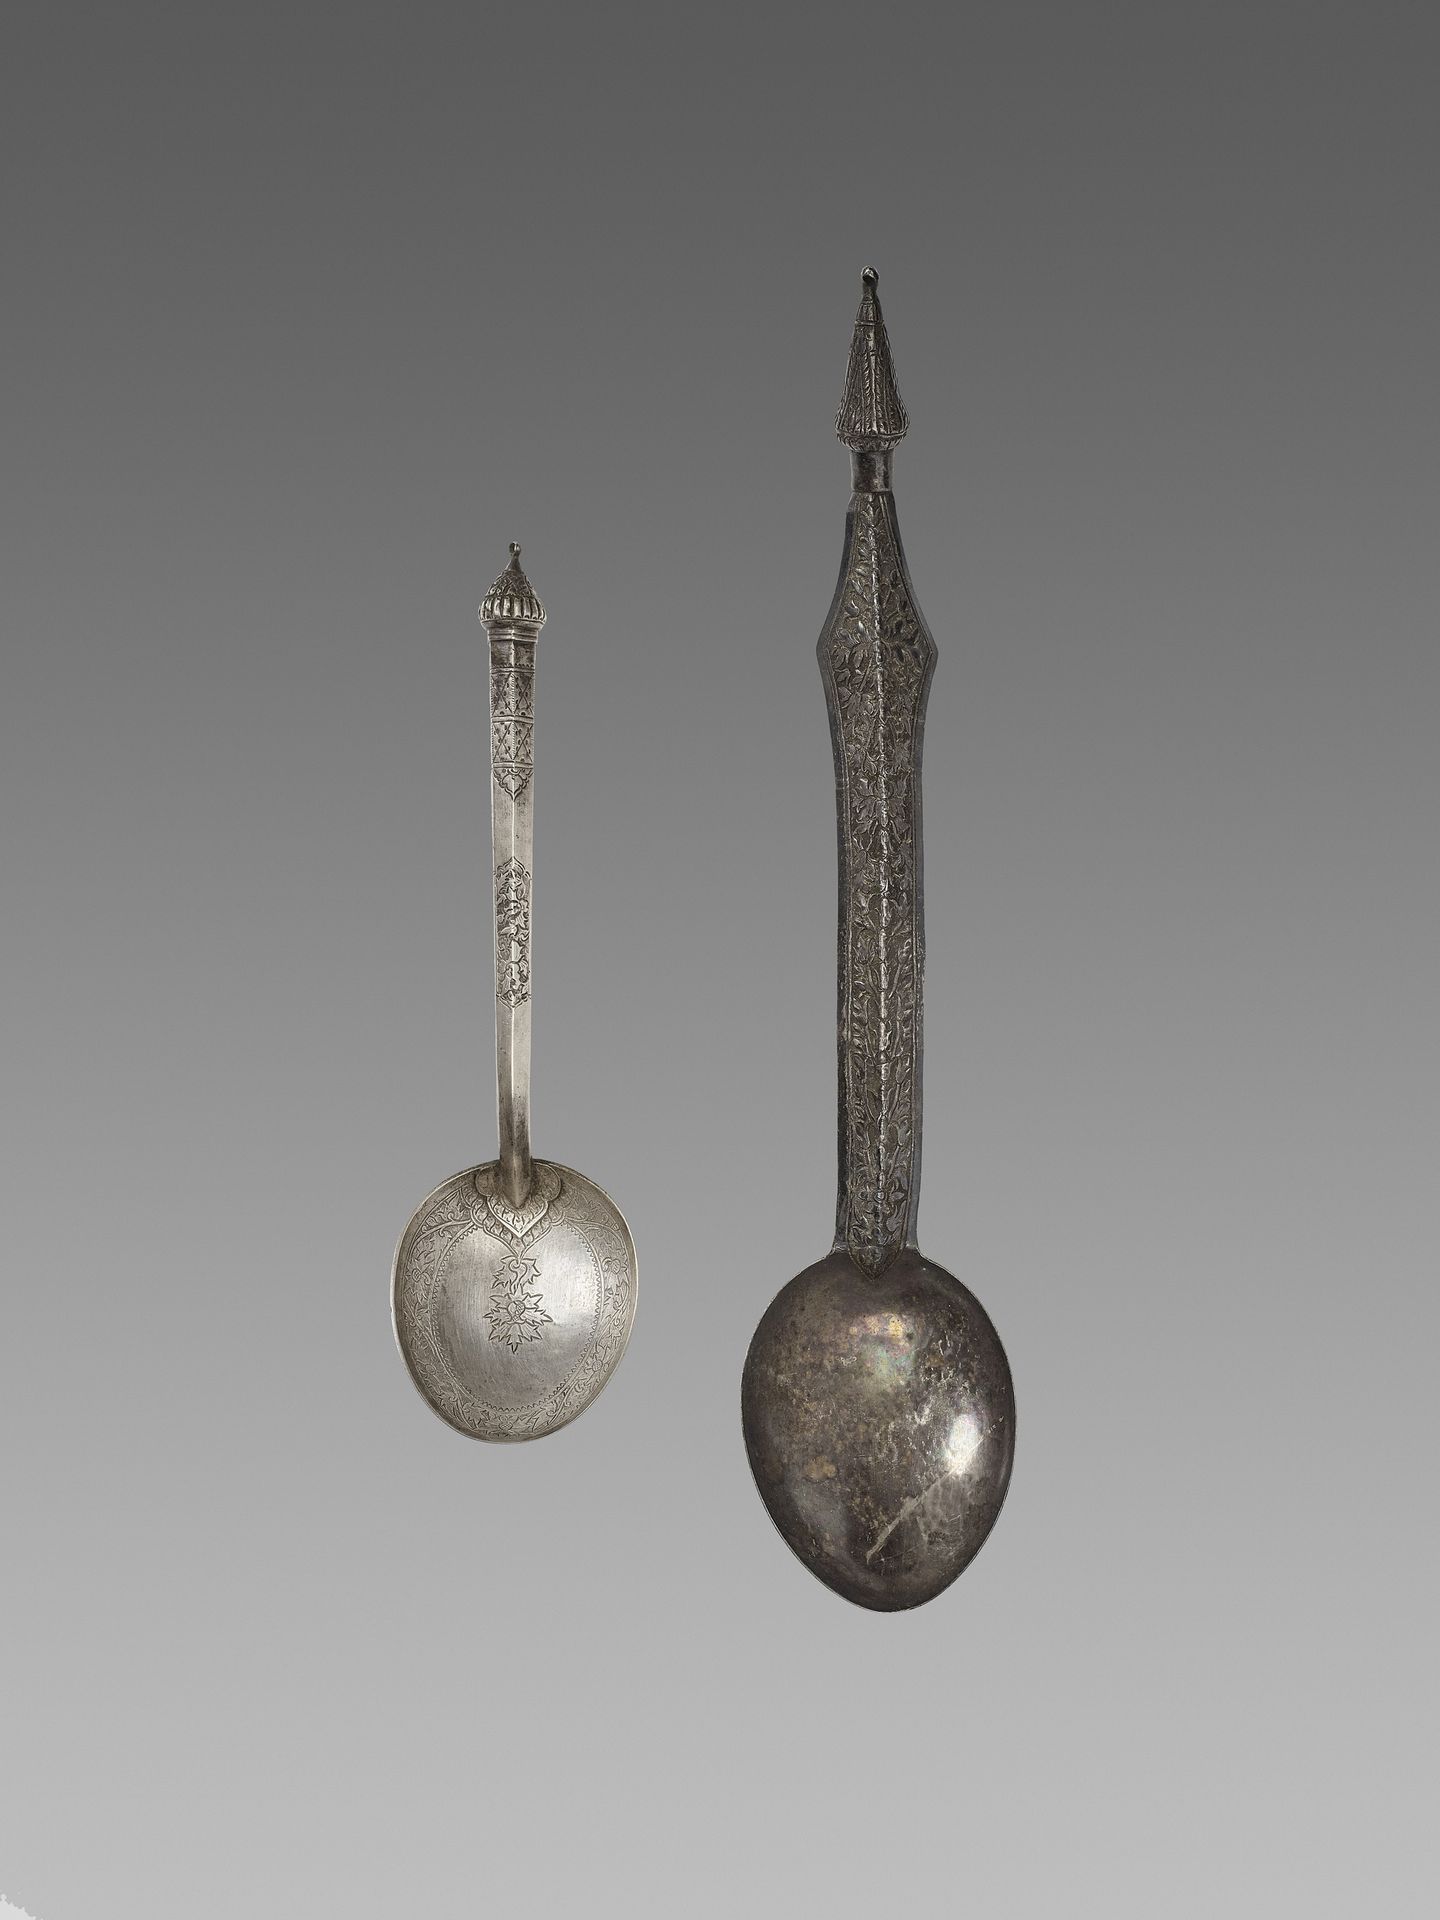 TWO LARGE CAMBODIAN SILVER SPOONS TWO LARGE CAMBODIAN SILVER SPOONS
Cambodia, 19&hellip;